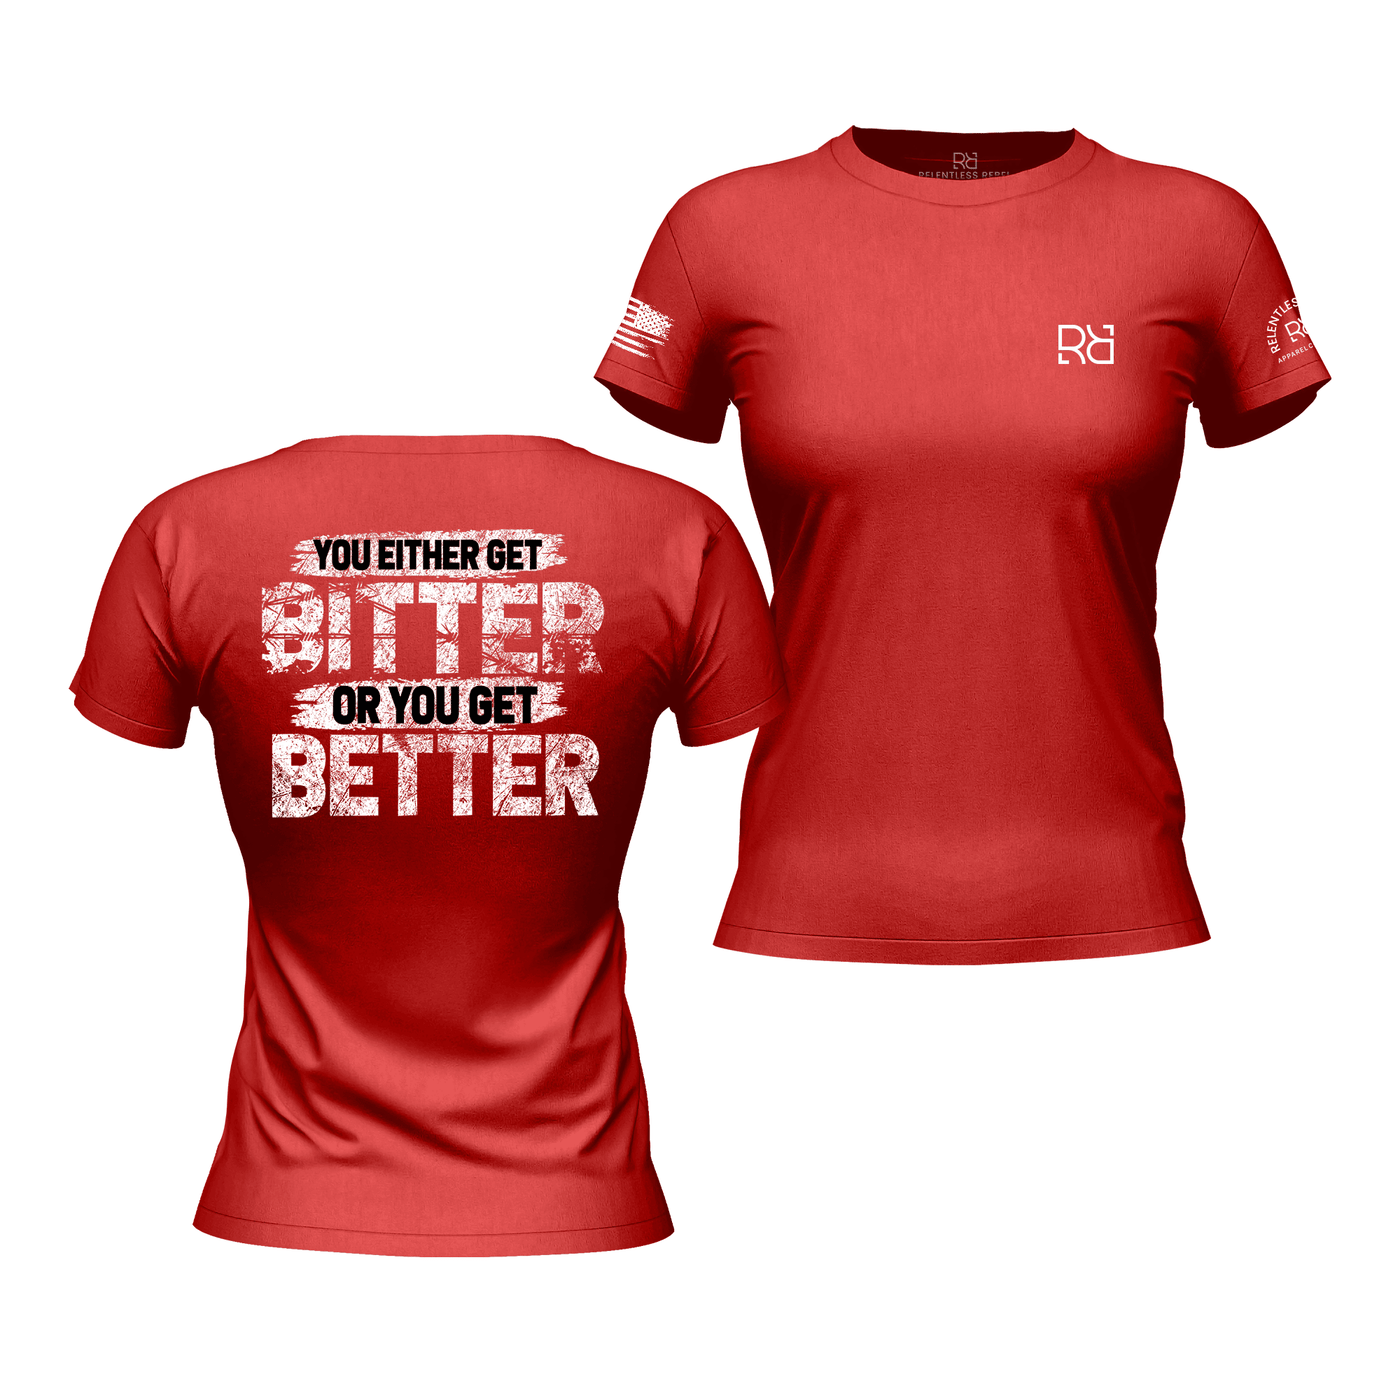 You Either Get Better Rebel Red Women's Tee